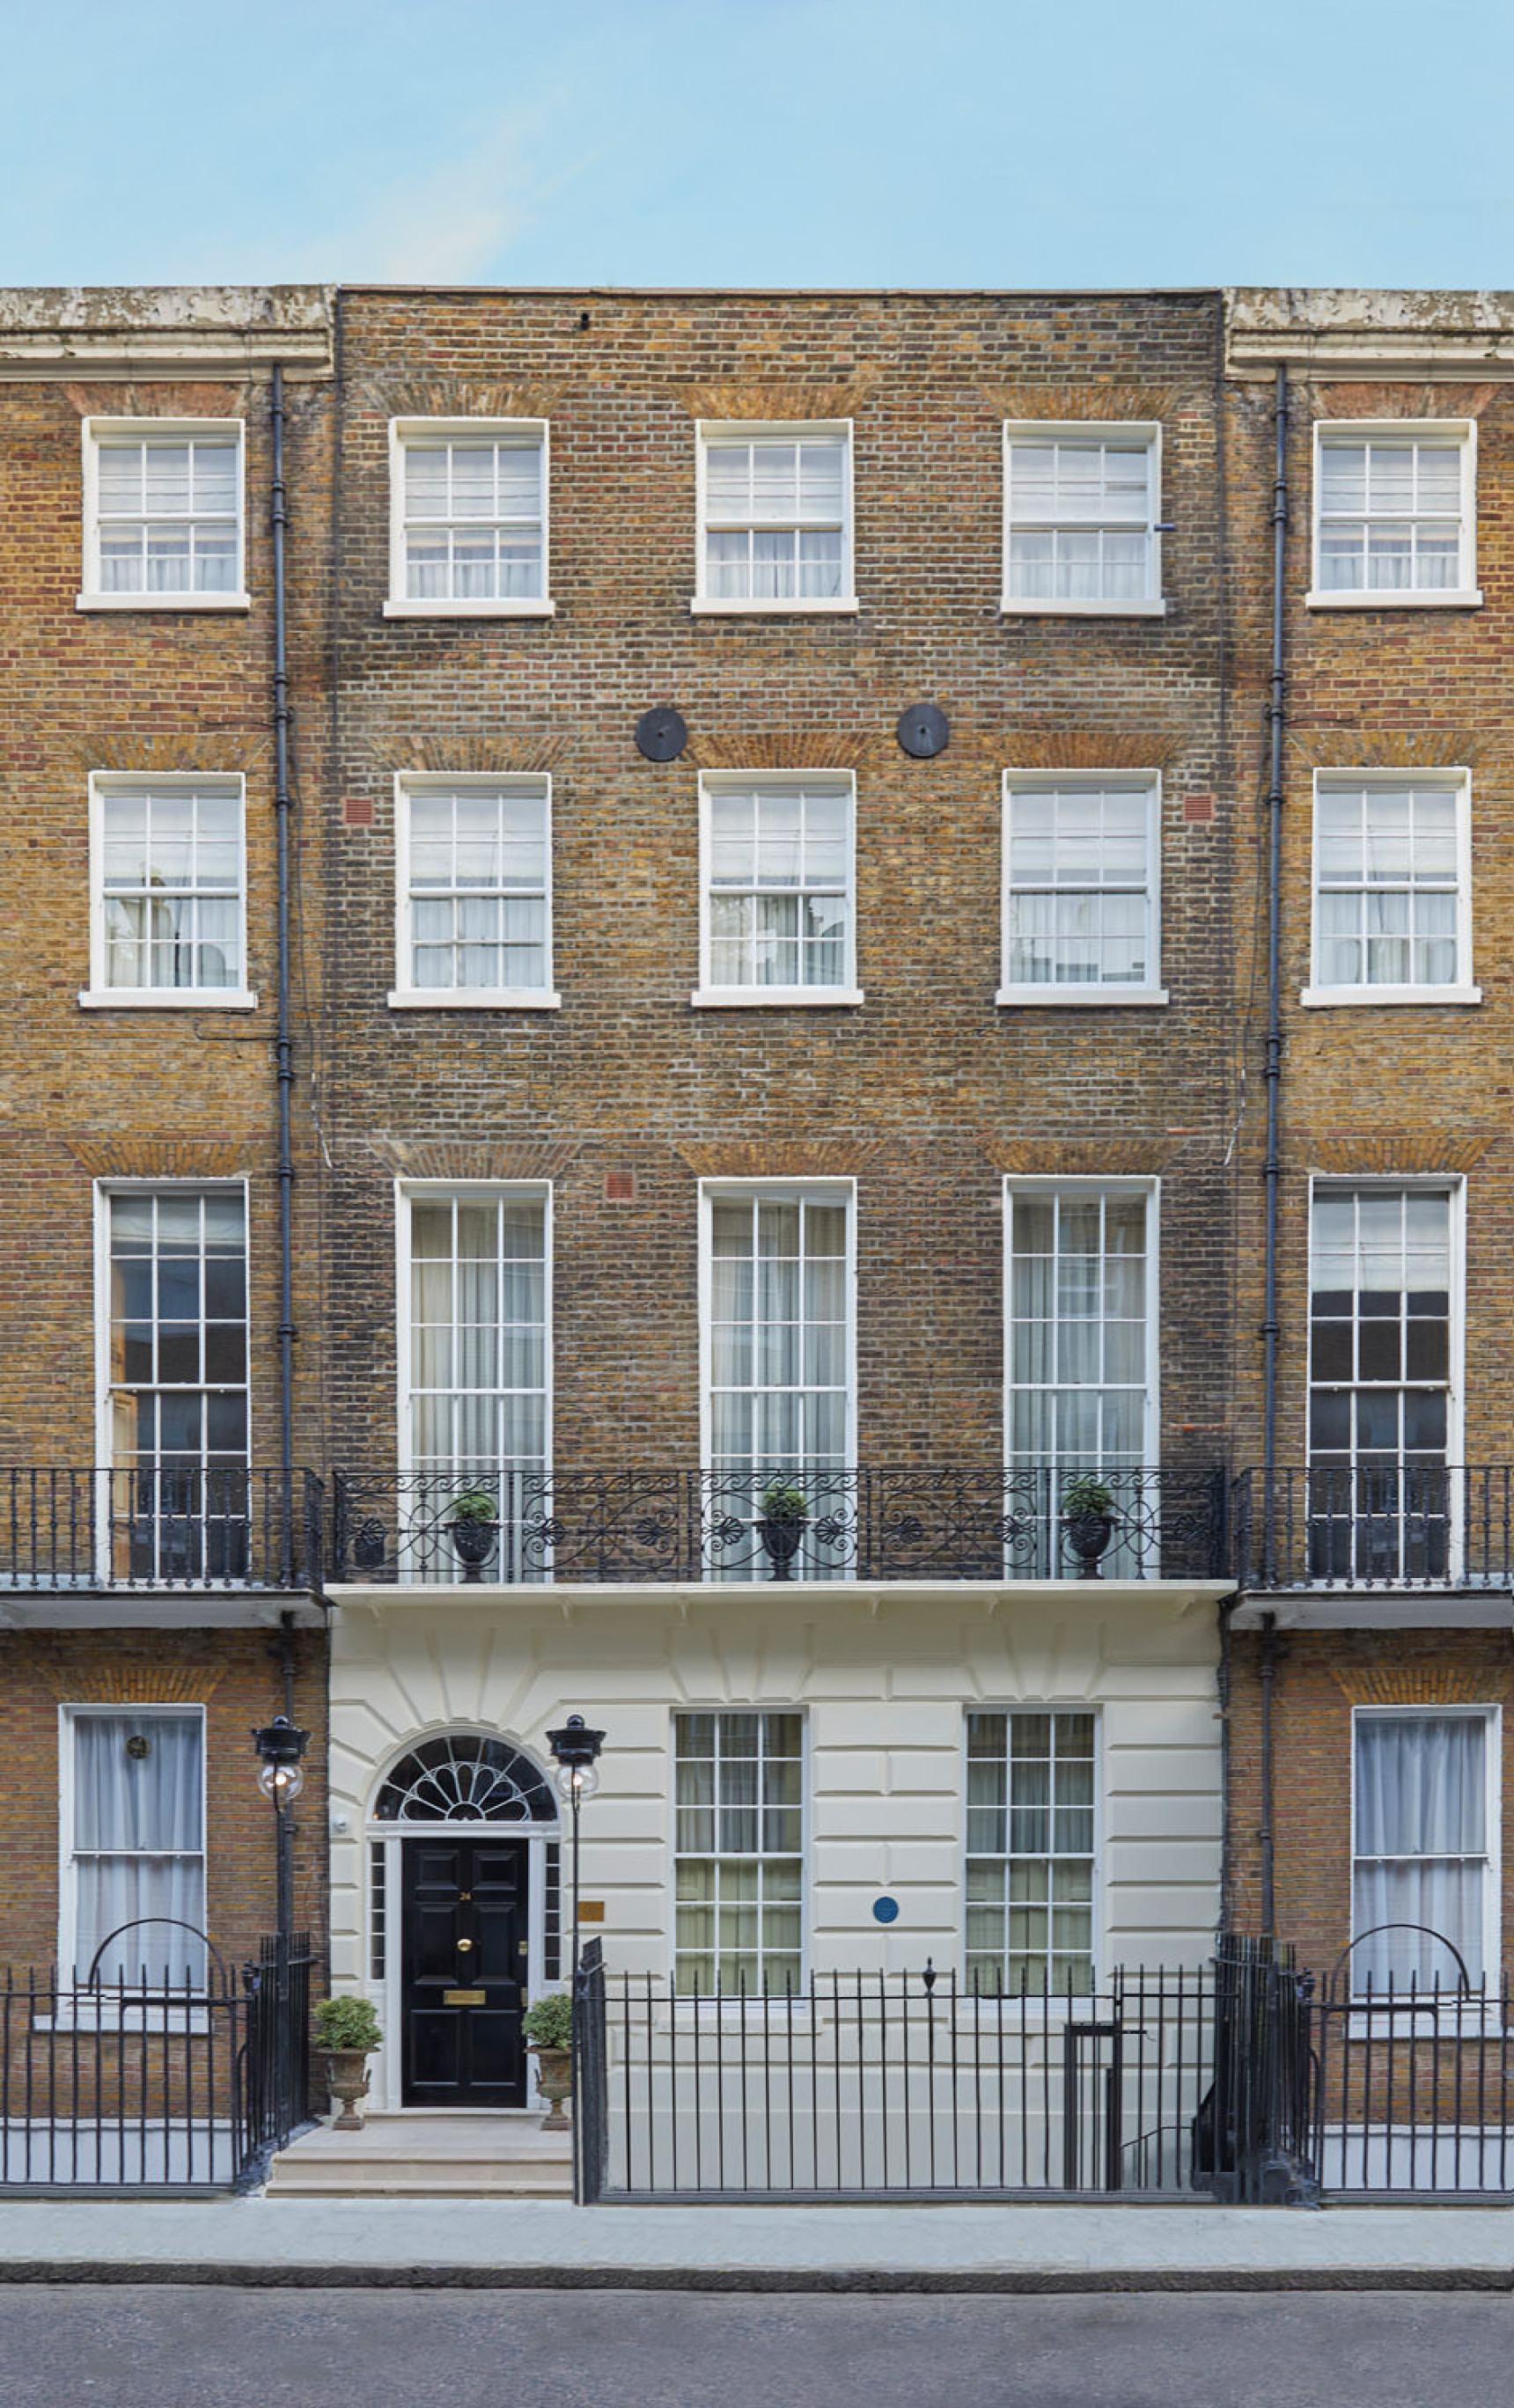 Located on the beautiful Upper Berkeley Street in central London